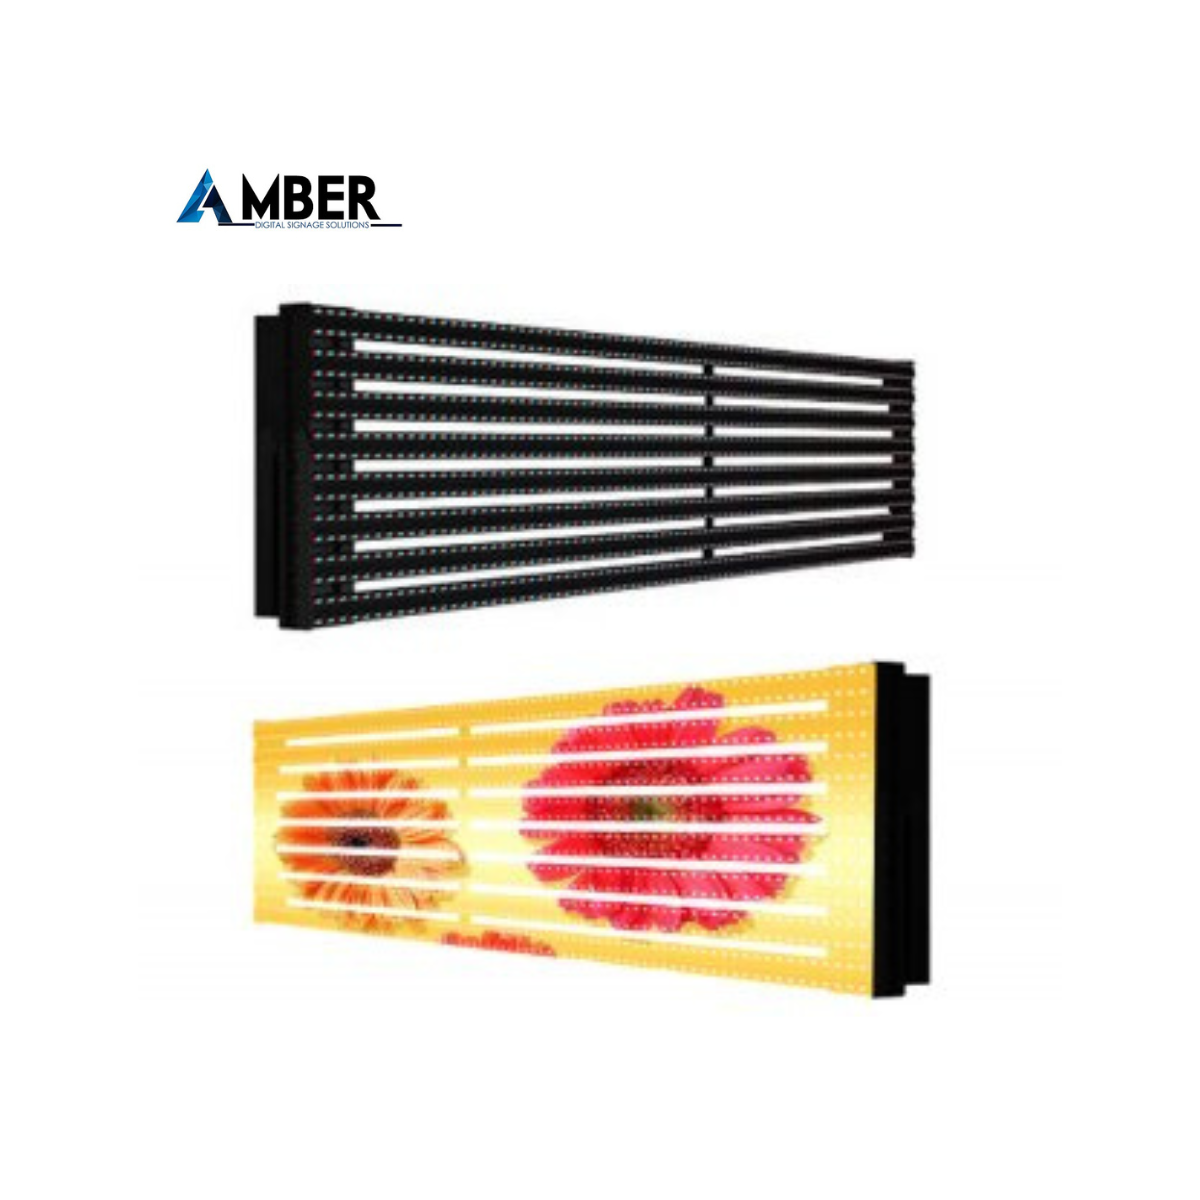 Amber BV-OC Outdoor LED Wall Fixed Install Series